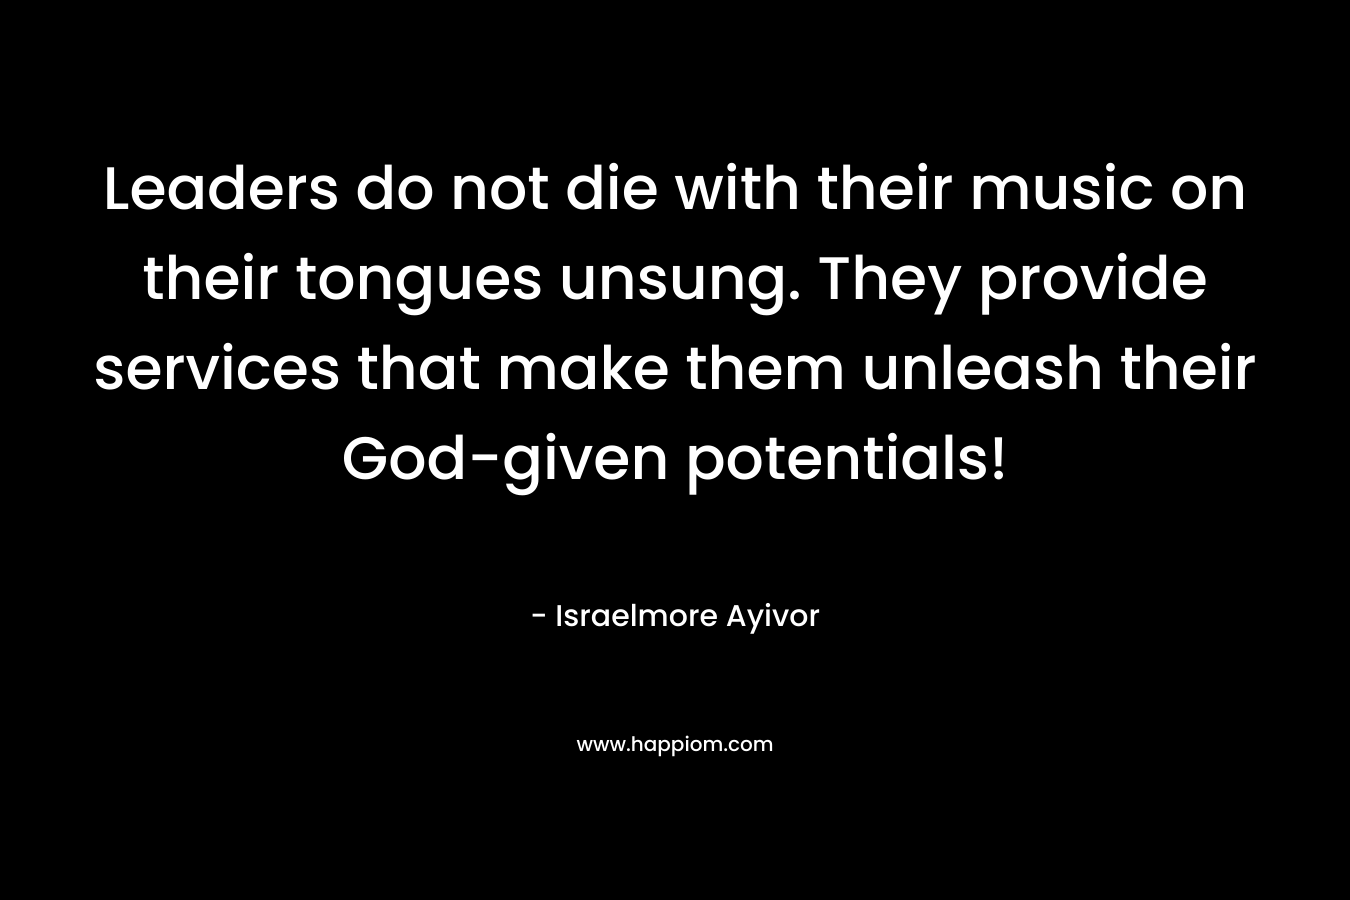 Leaders do not die with their music on their tongues unsung. They provide services that make them unleash their God-given potentials!